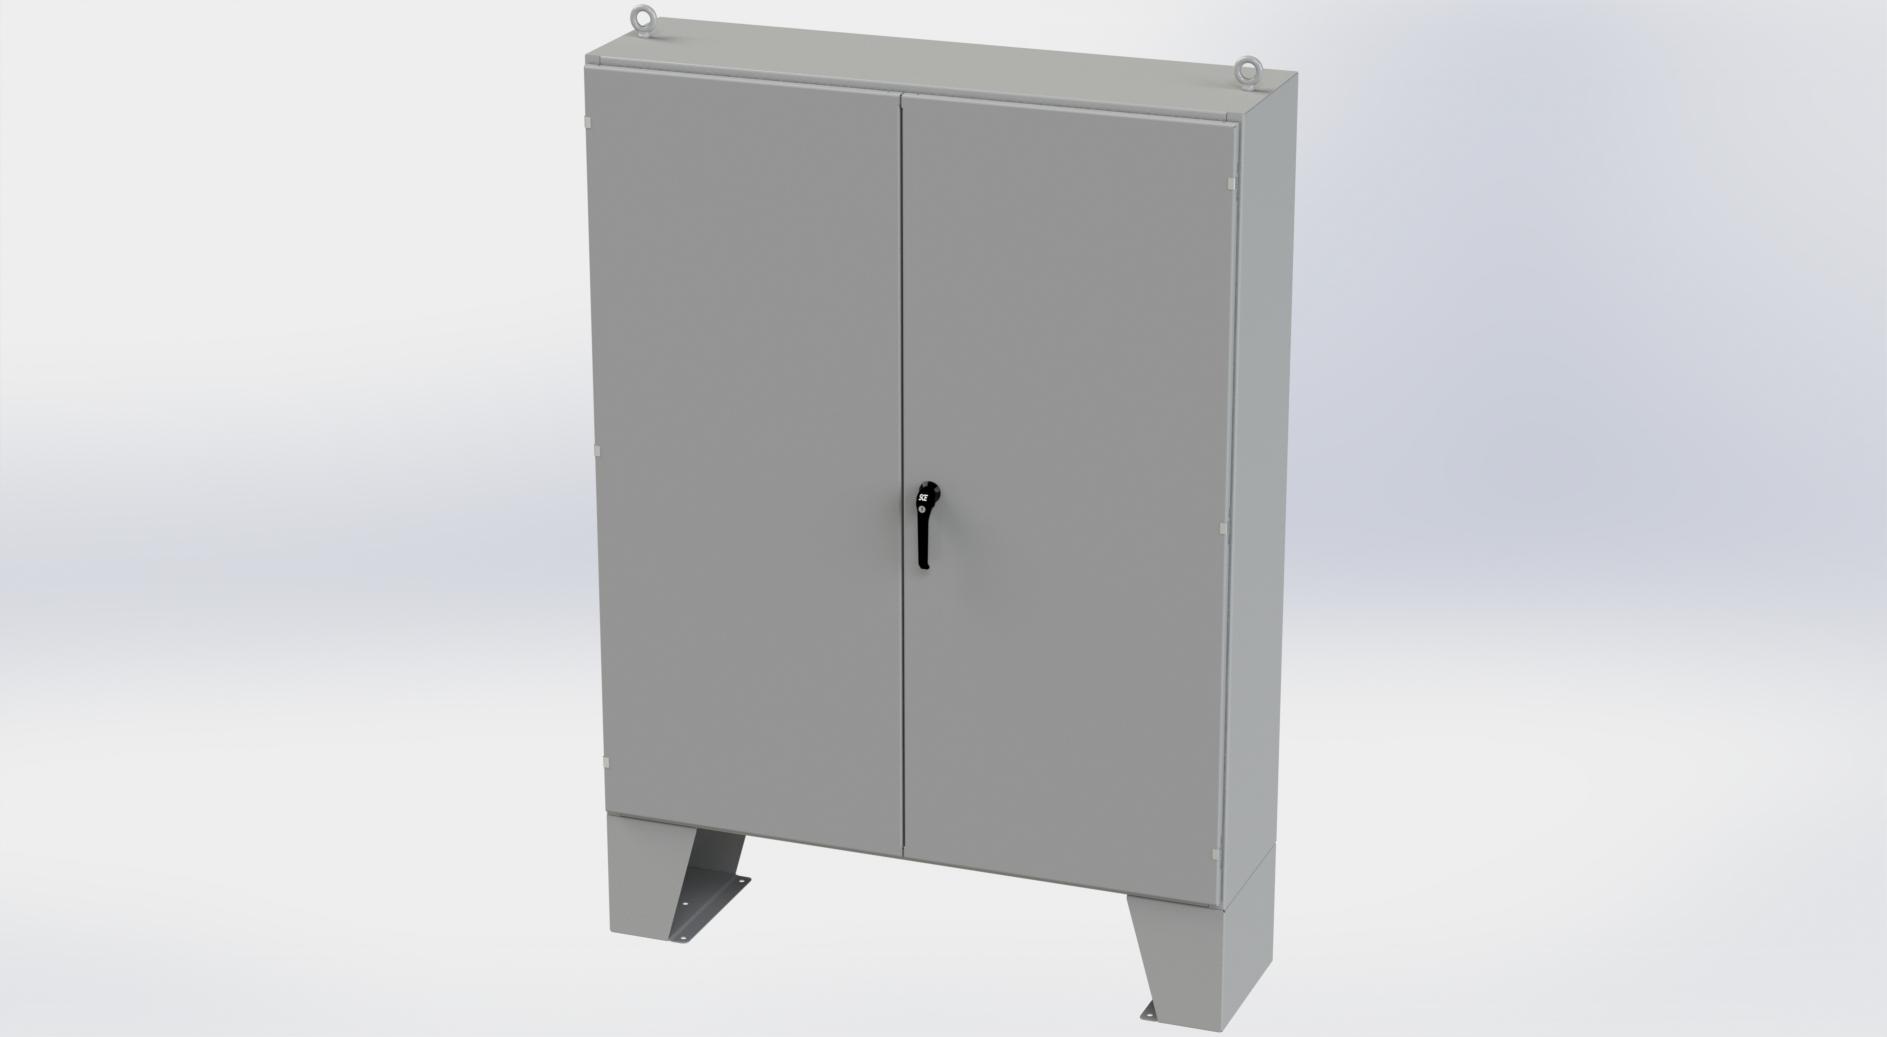 Saginaw Control SCE-726016ULP 2DR LP Enclosure, Height:72.00", Width:60.00", Depth:16.00", ANSI-61 gray powder coating inside and out. Optional sub-panels are powder coated white.